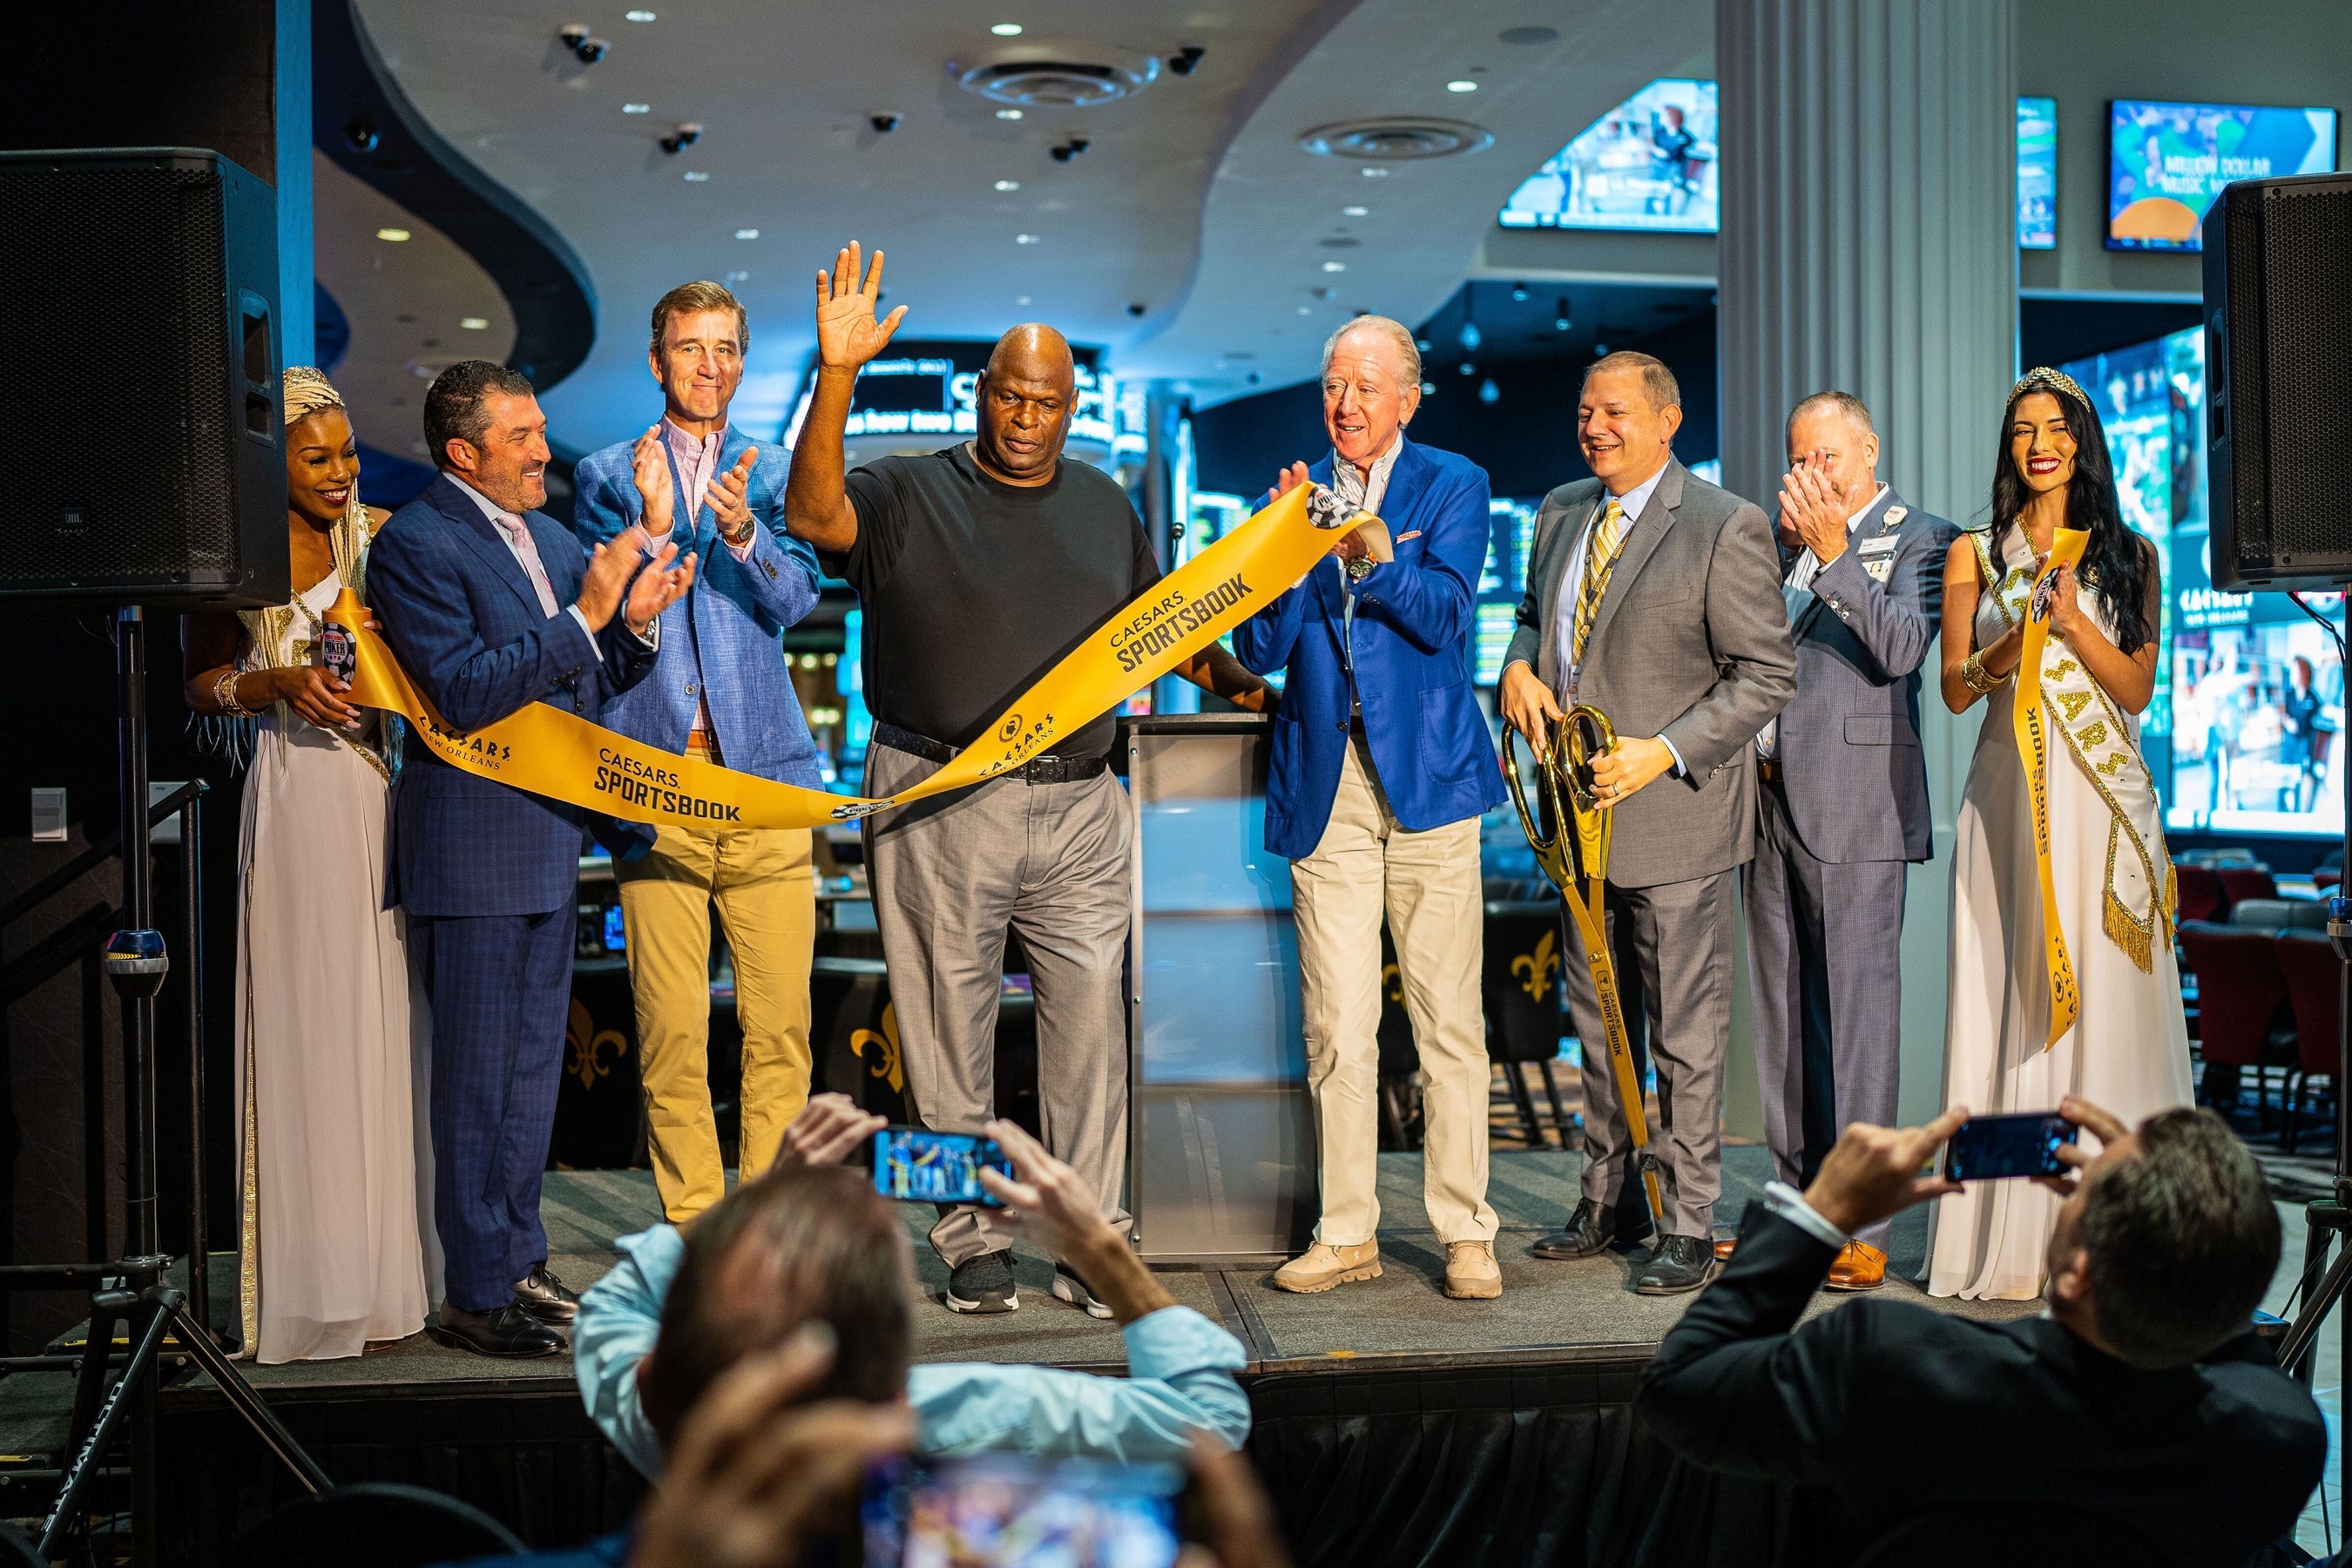 Caesars Entertainment Opens Two State-of-the-Art Caesars Sportsbook Locations and a Brand-New World Series of Poker Room in Louisiana